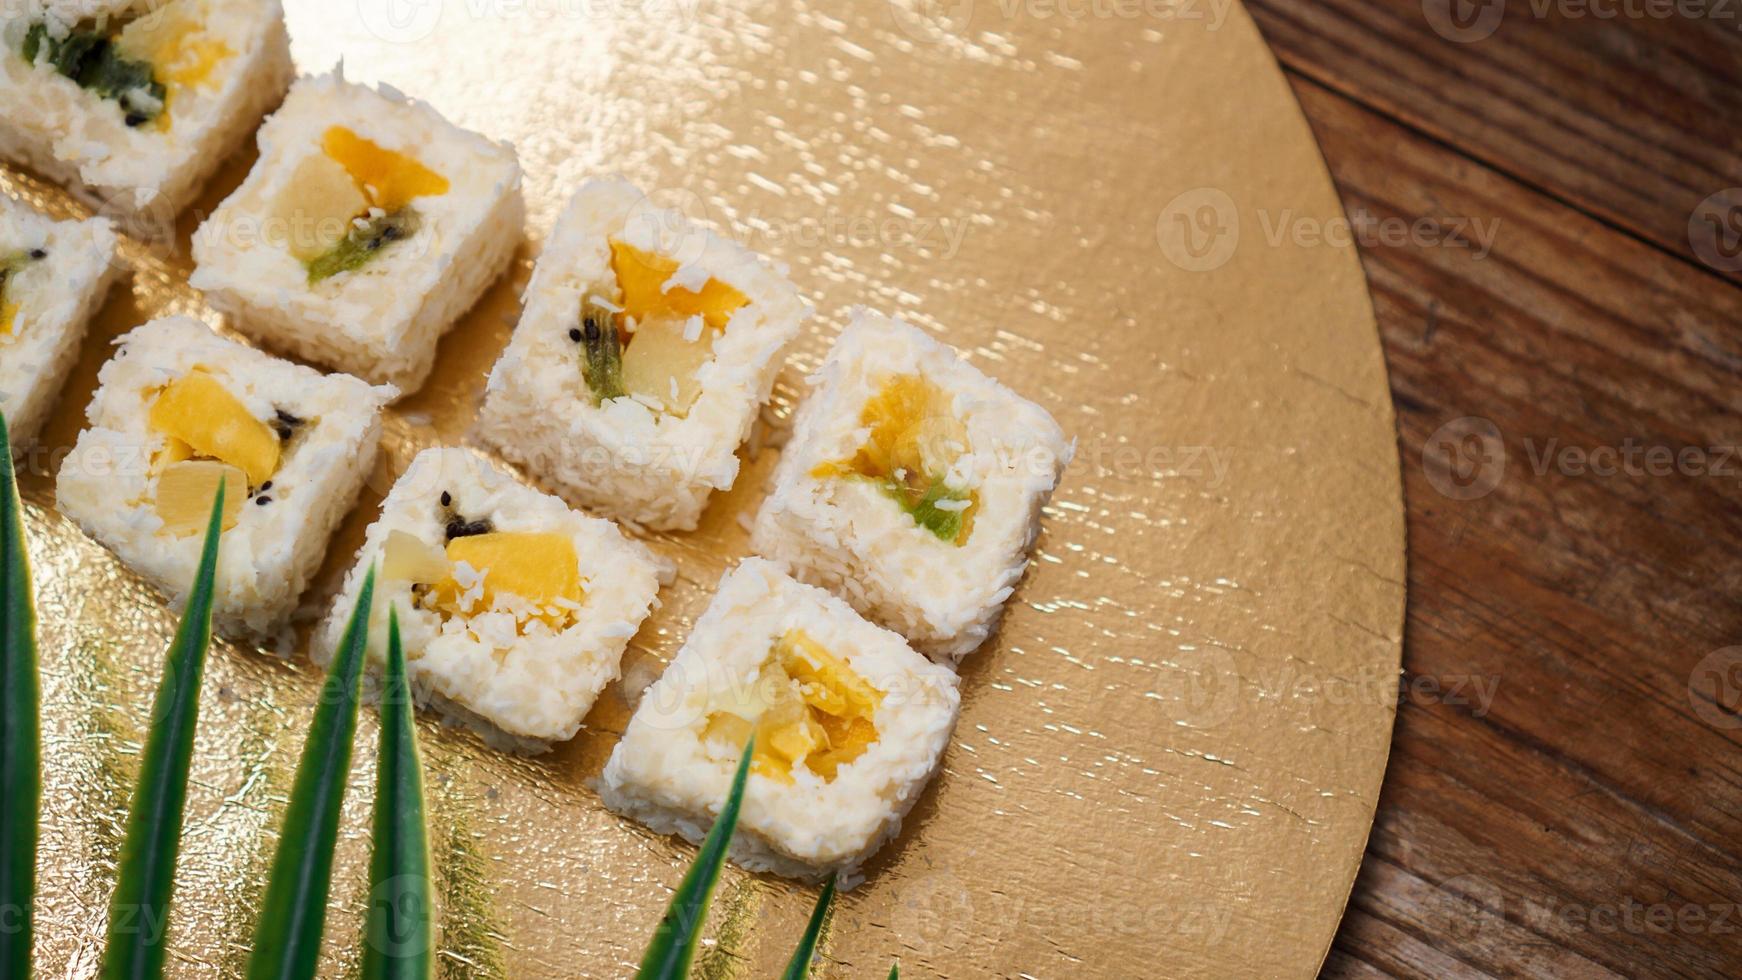 Dessert Sushi - Roll with Fruit and Cream Cheese inside photo